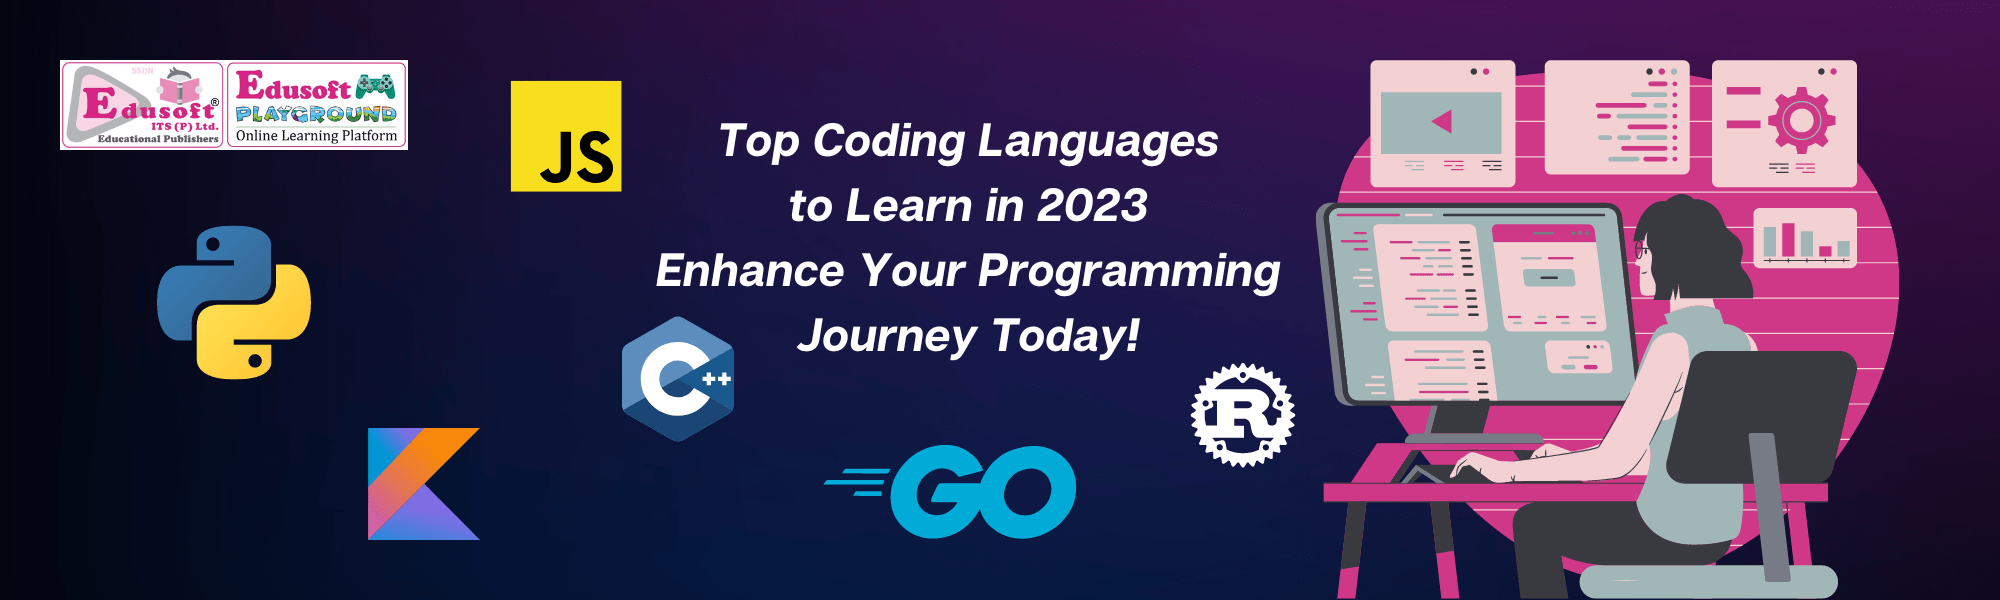 Top Coding Languages to Learn in 2023